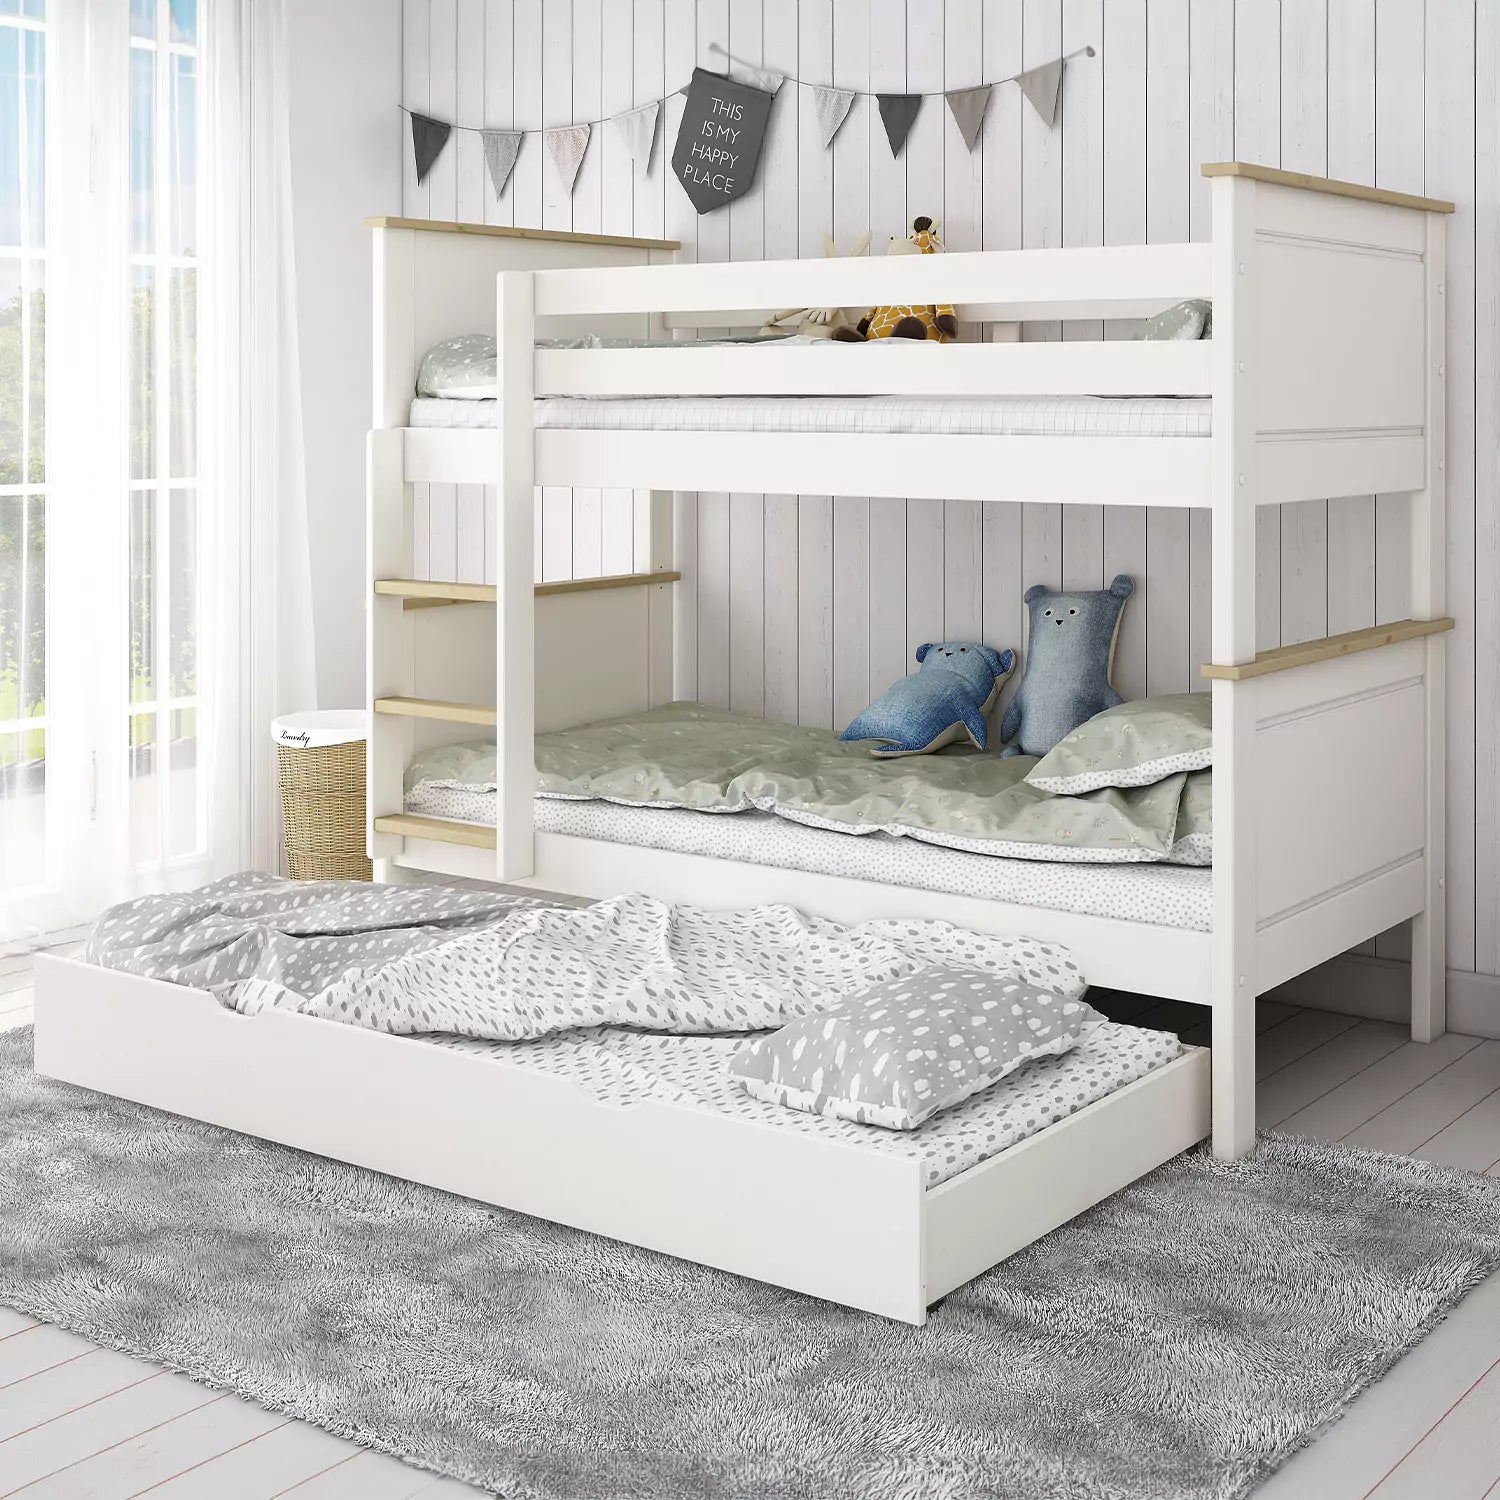 An image of Heritage Trundle Bunk Bed 2 with Drawer - White & Oak